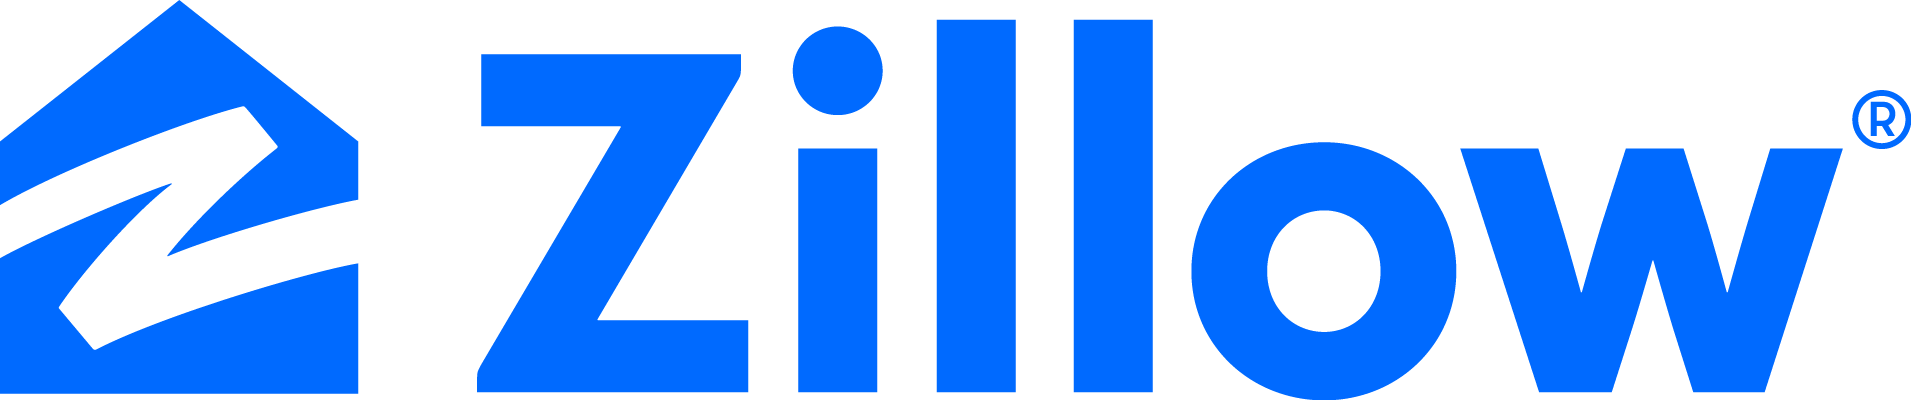 zillow-logo.png